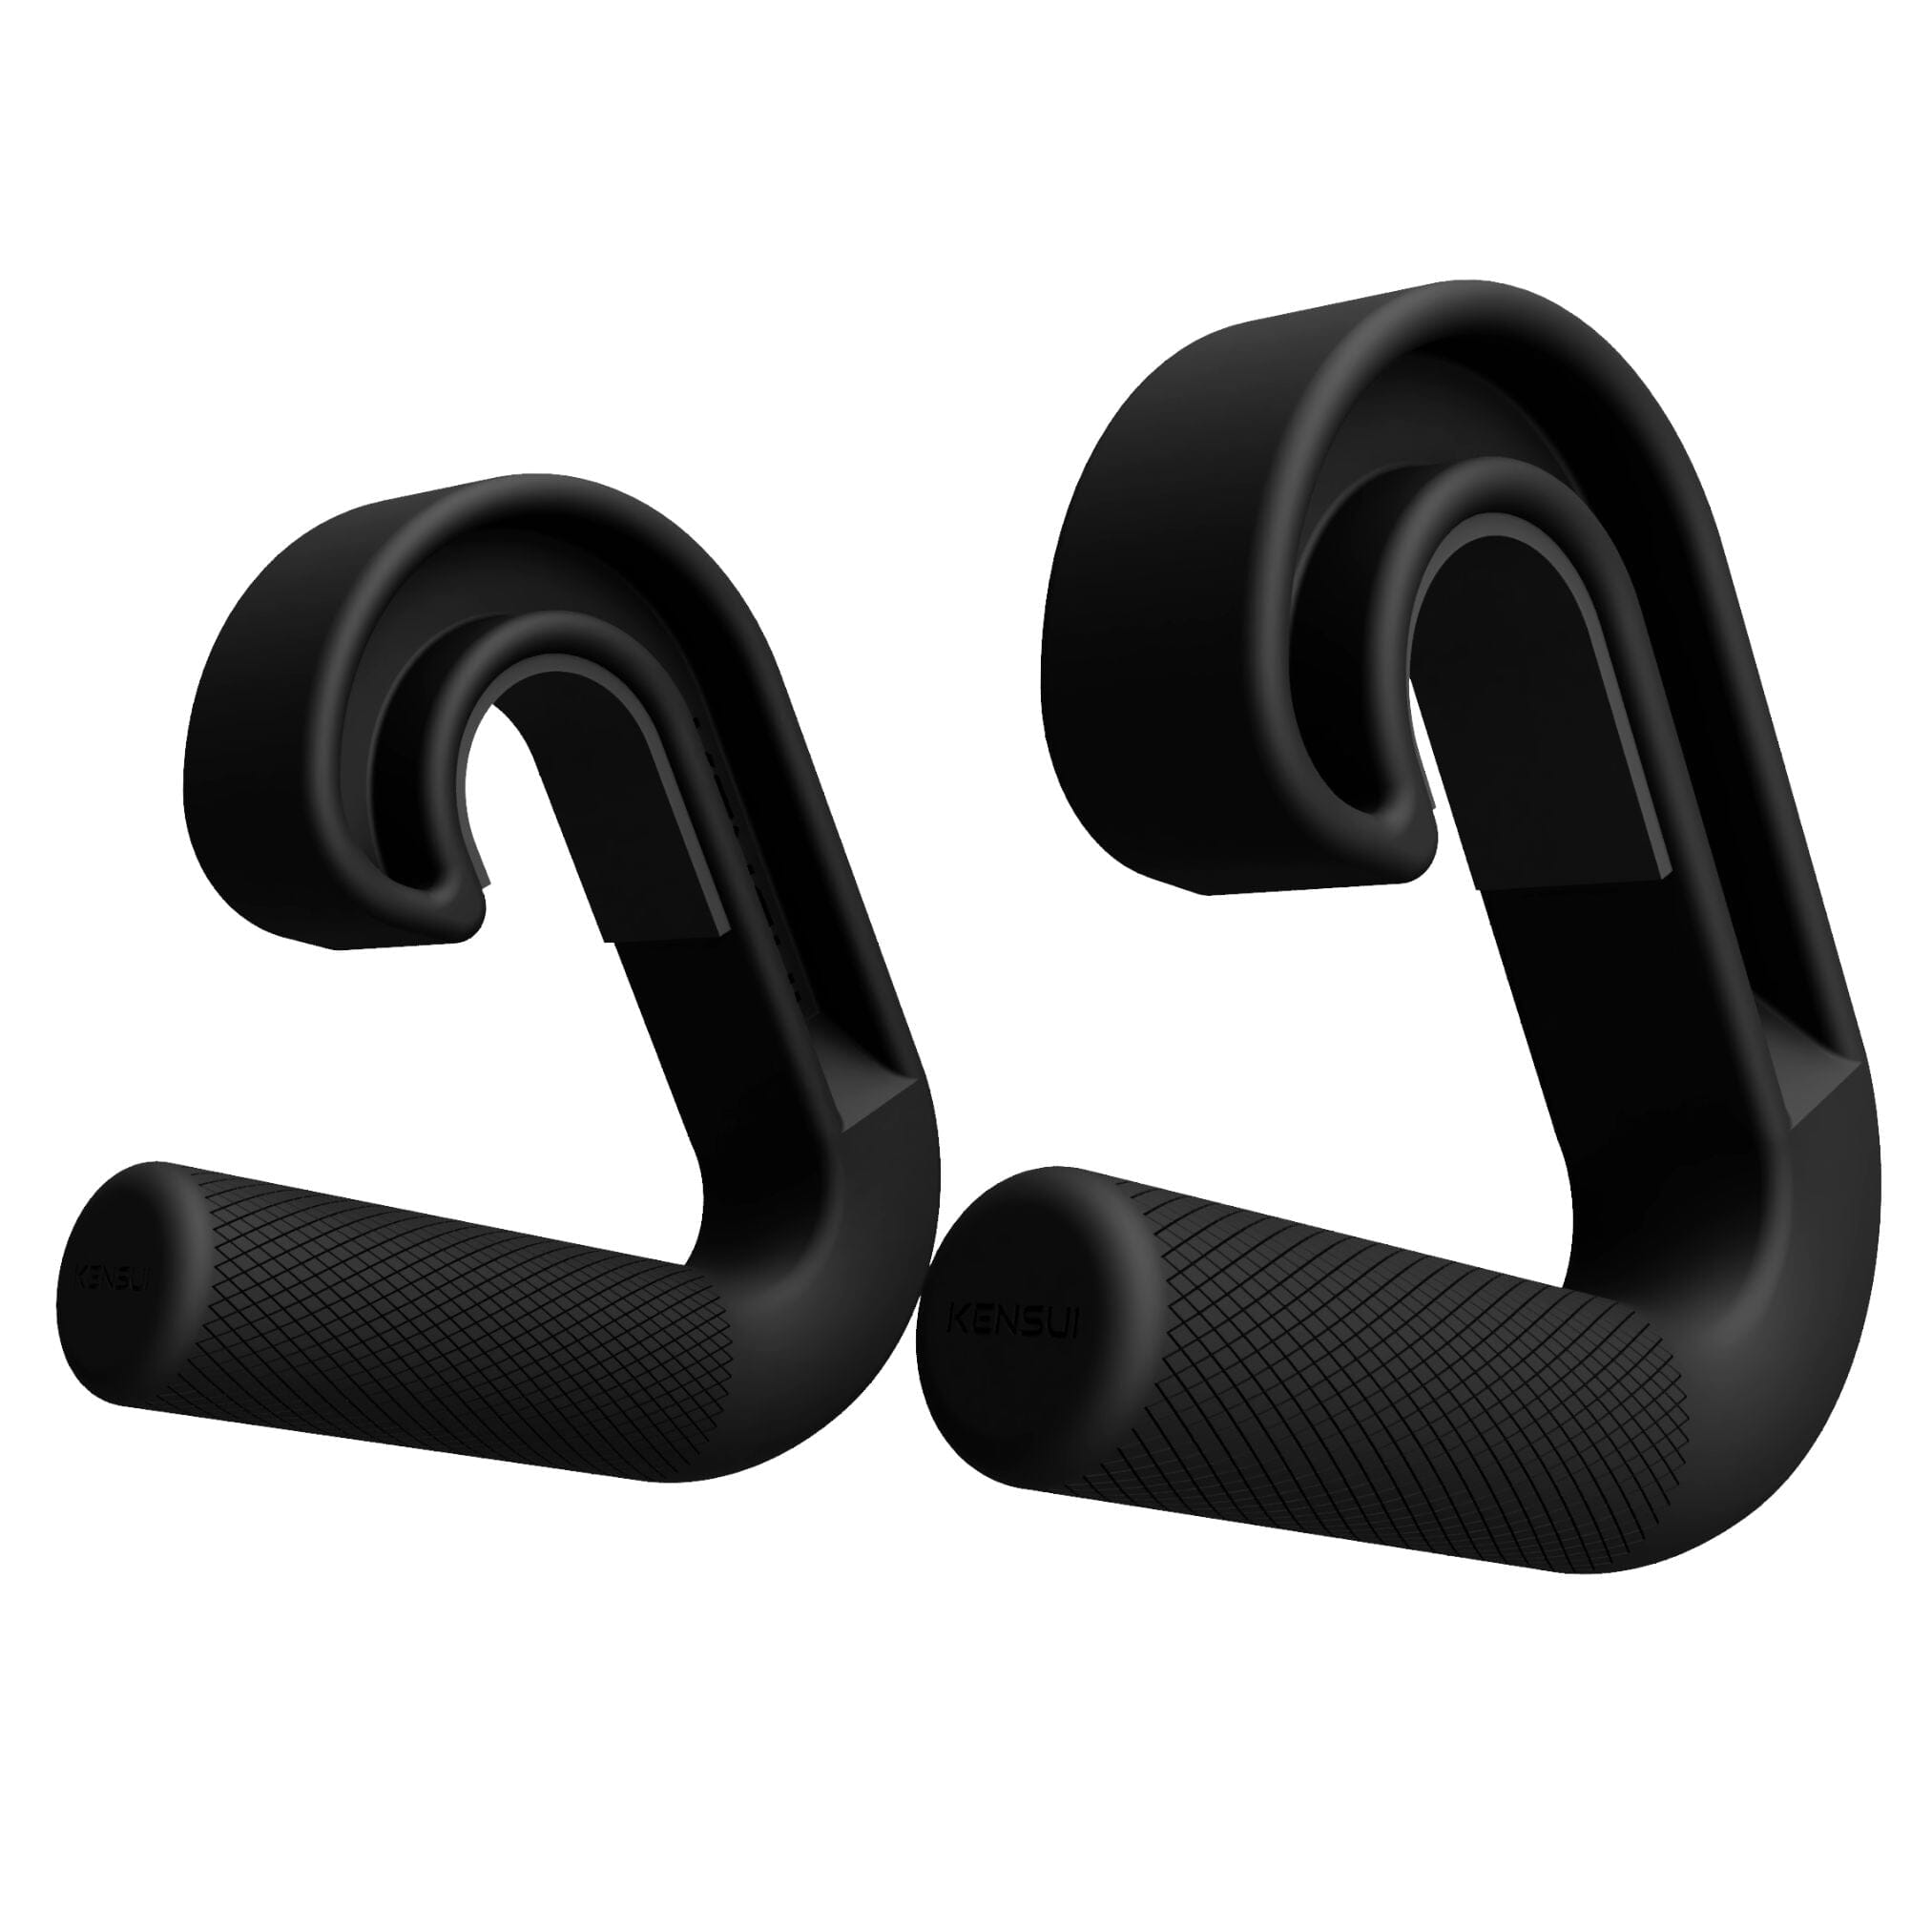 Resistance Band Handle Hook Handle Grip Pull Down Bar for Gym